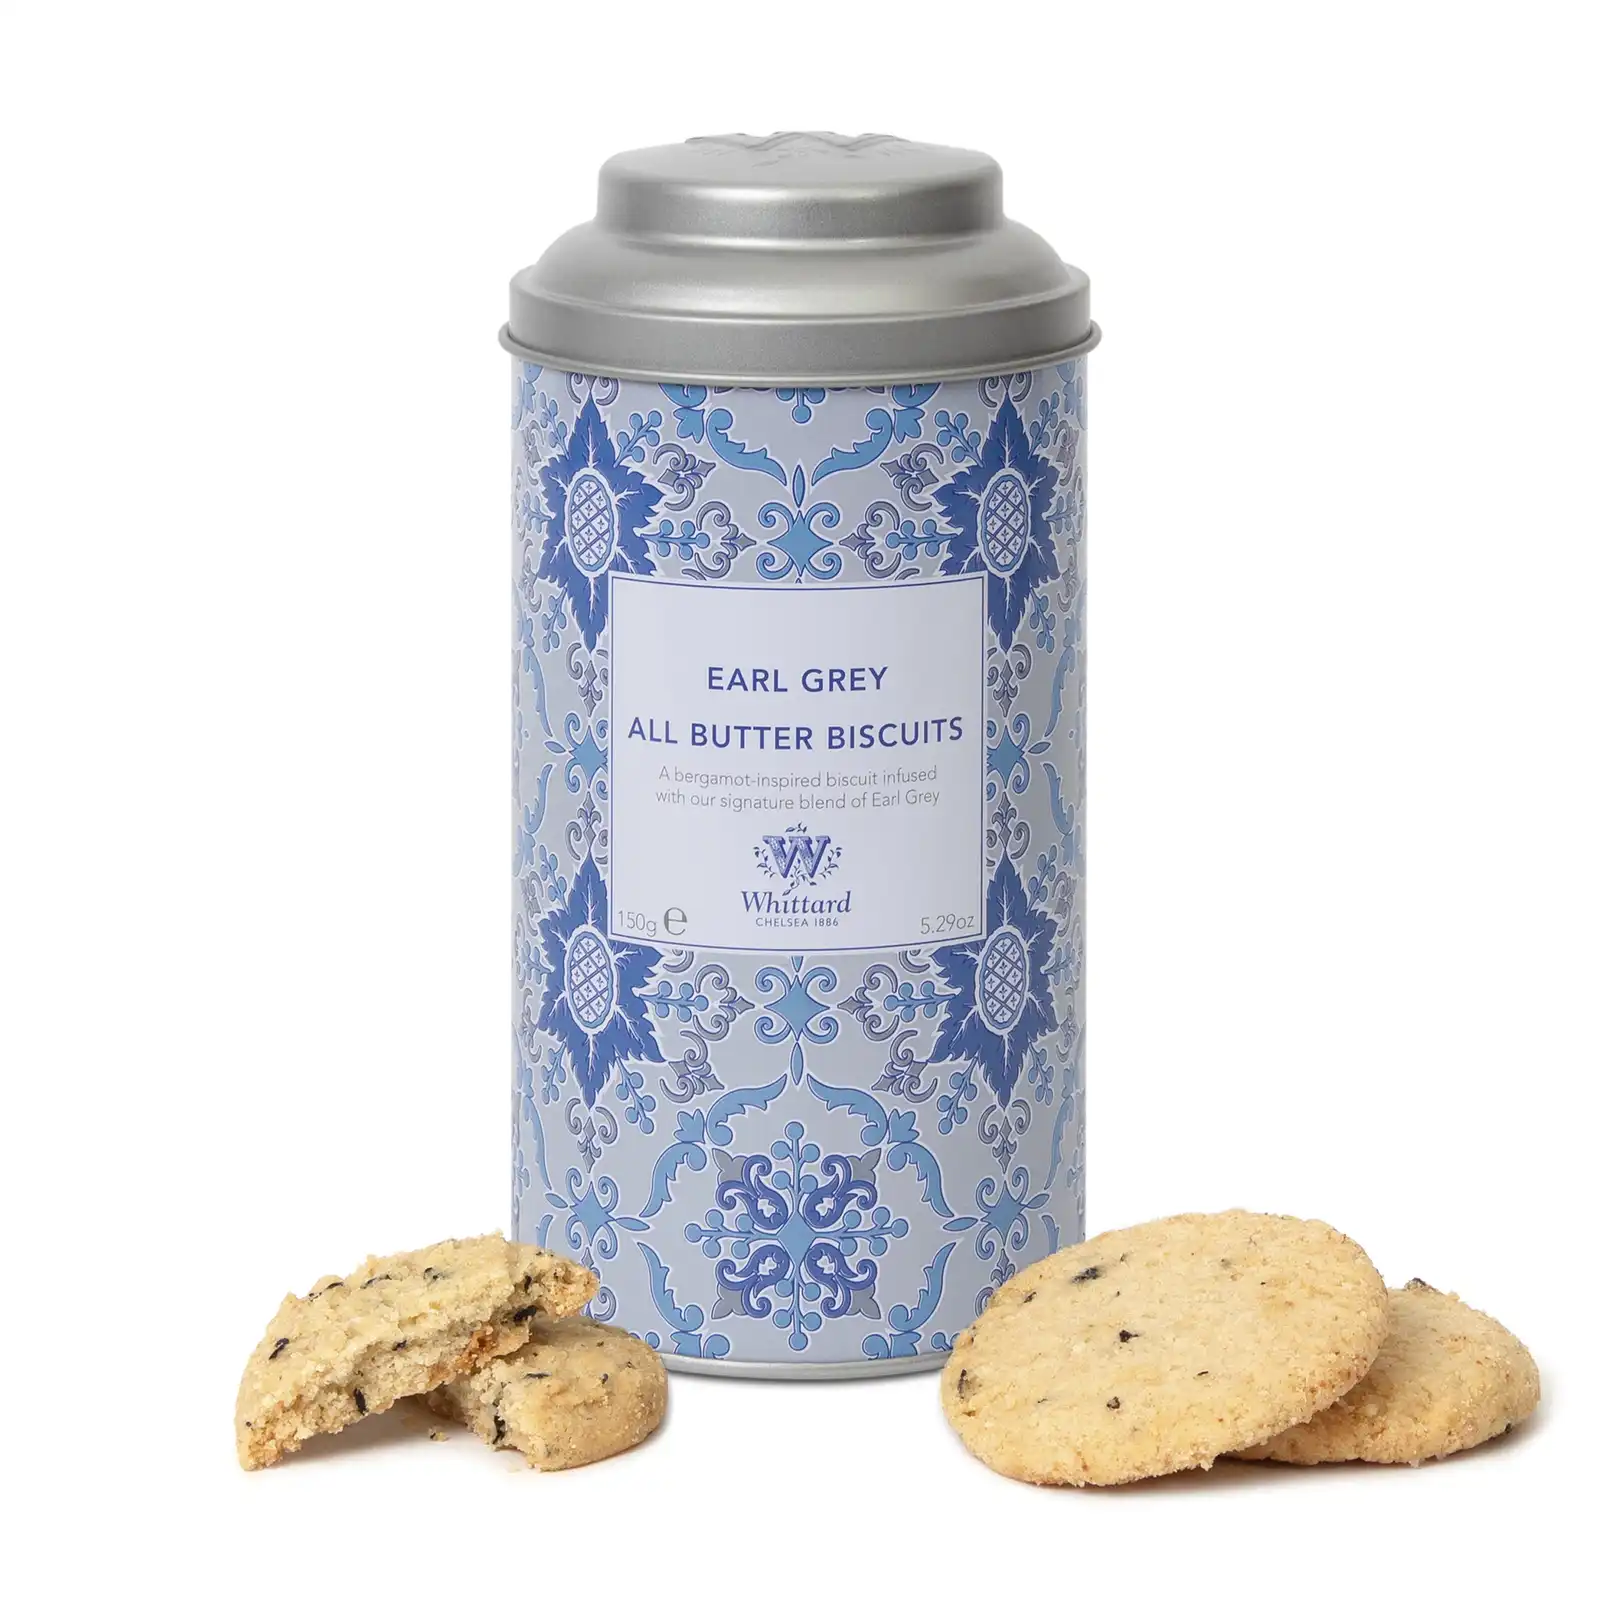 Whittard TD Biscuits - Earl Grey All Butter Biscuits Tin 150g